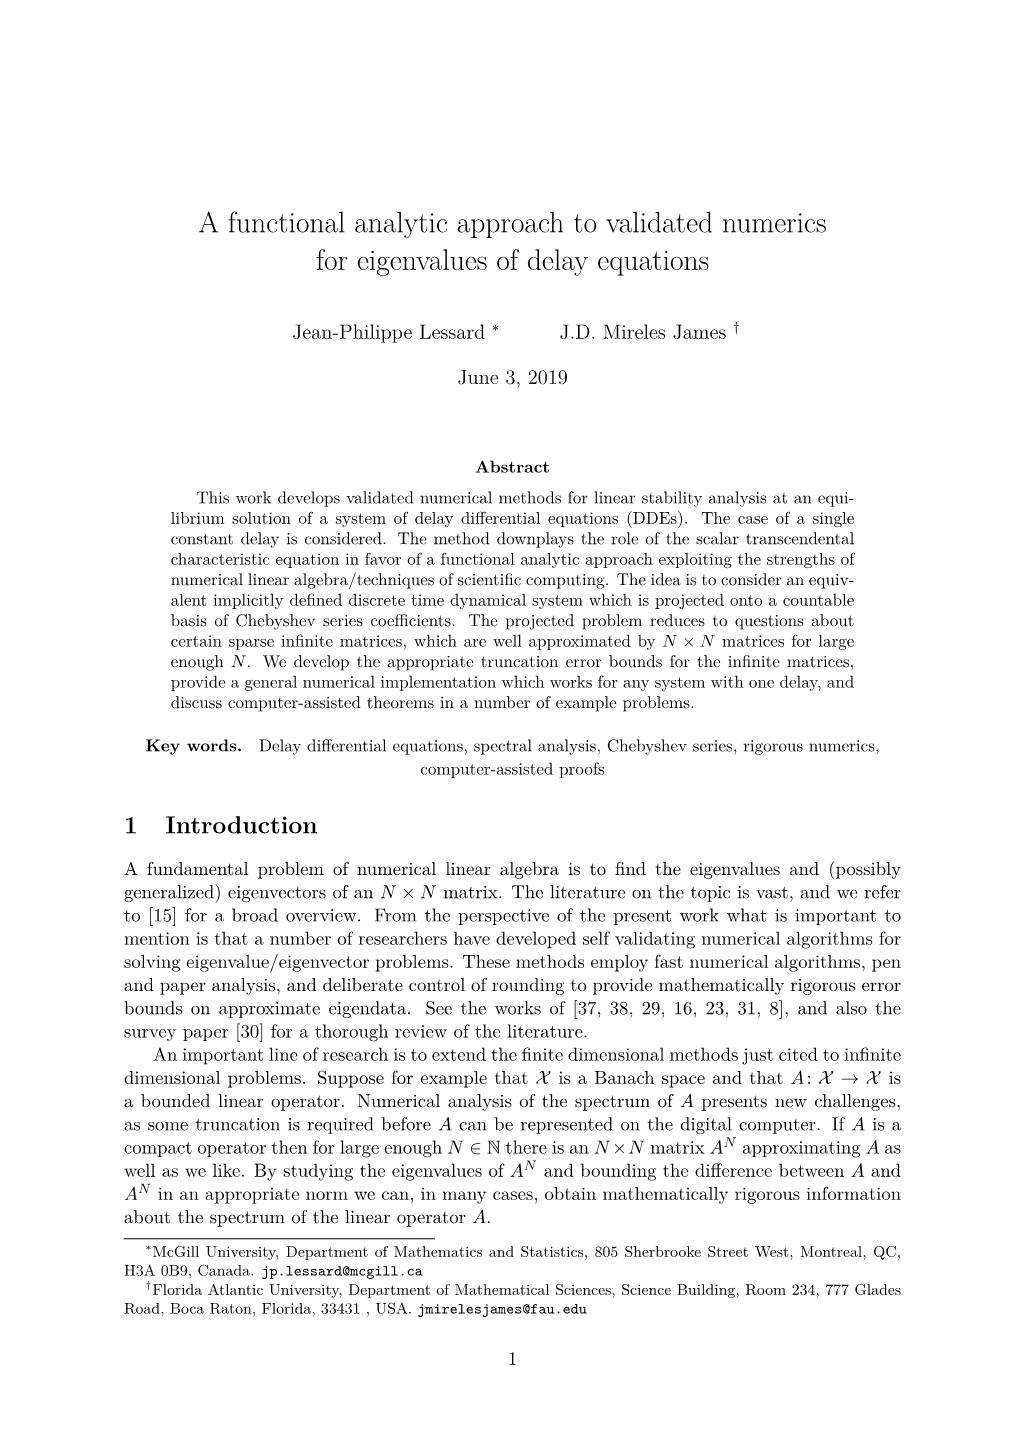 A Functional Analytic Approach to Validated Numerics for Eigenvalues of Delay Equations